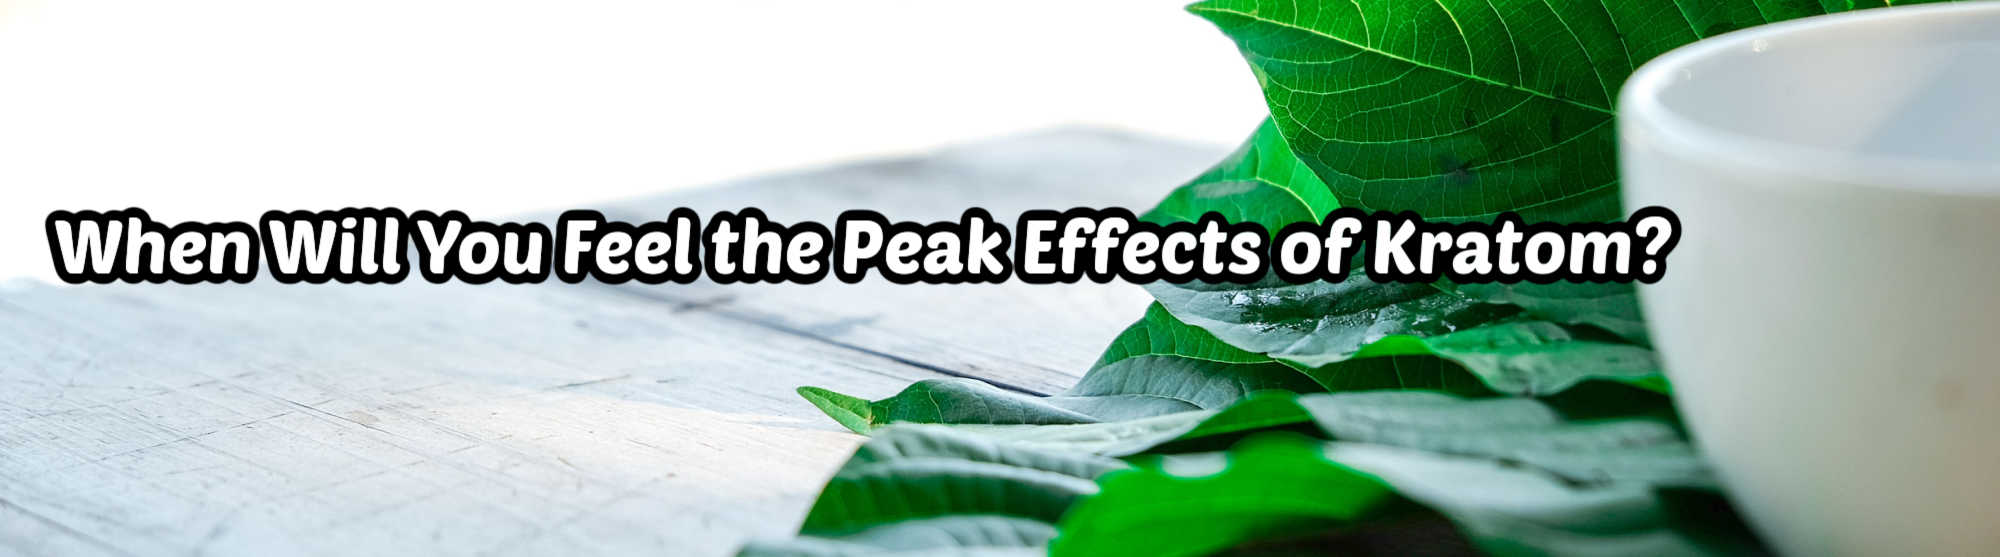 image of when will you feel the peak effects of kratom